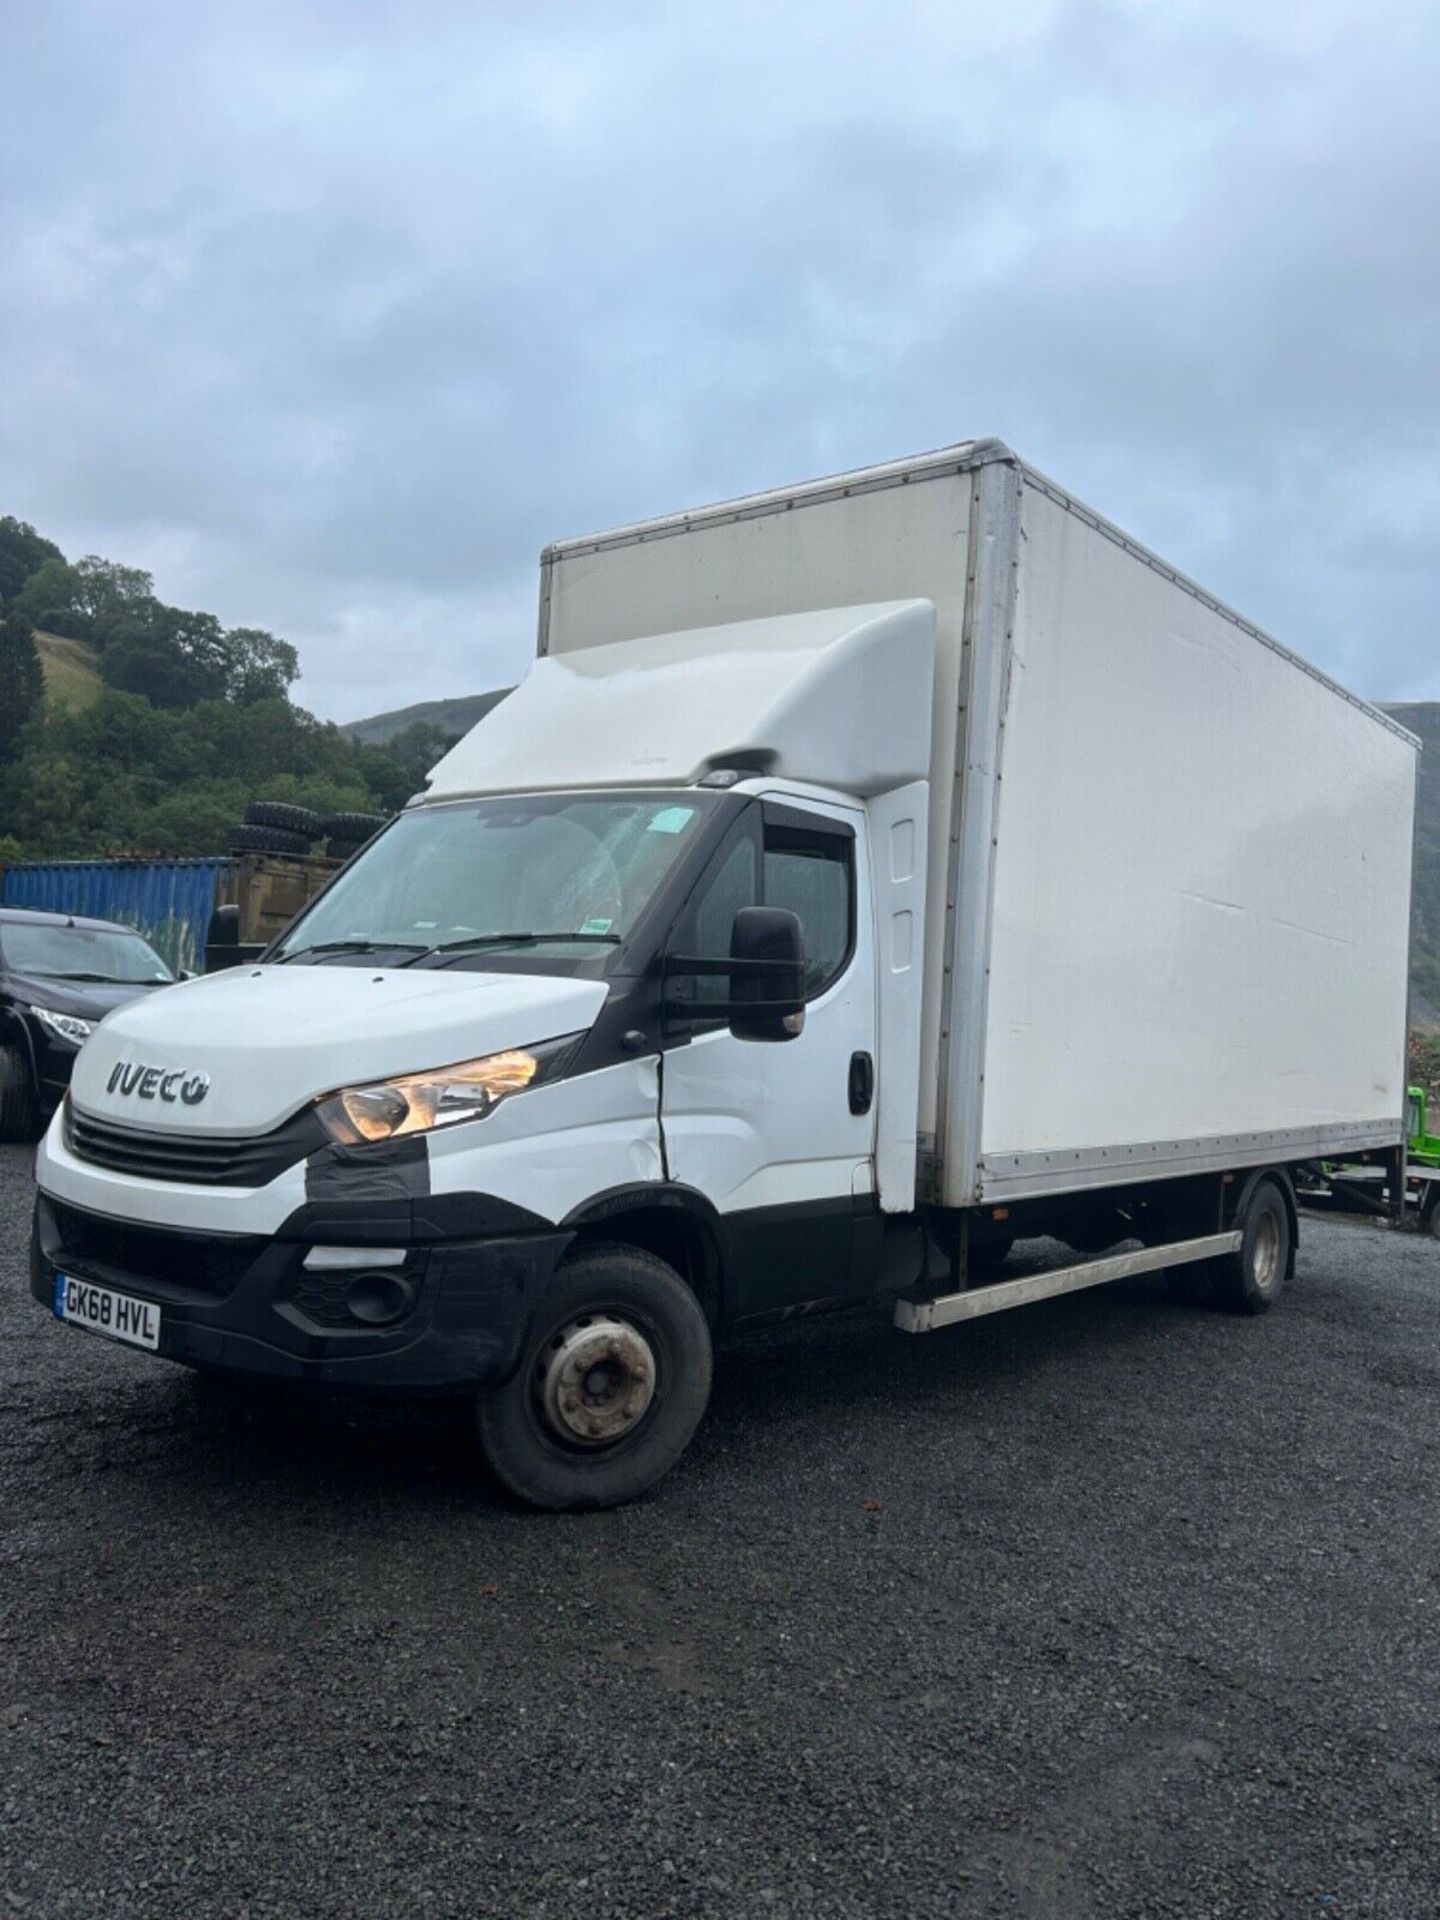 2018 IVECO DAILY 70C18 LUTON BOX VAN 7 TON LORRY TAIL LIFT RECOVERY TRUCK - Image 4 of 9